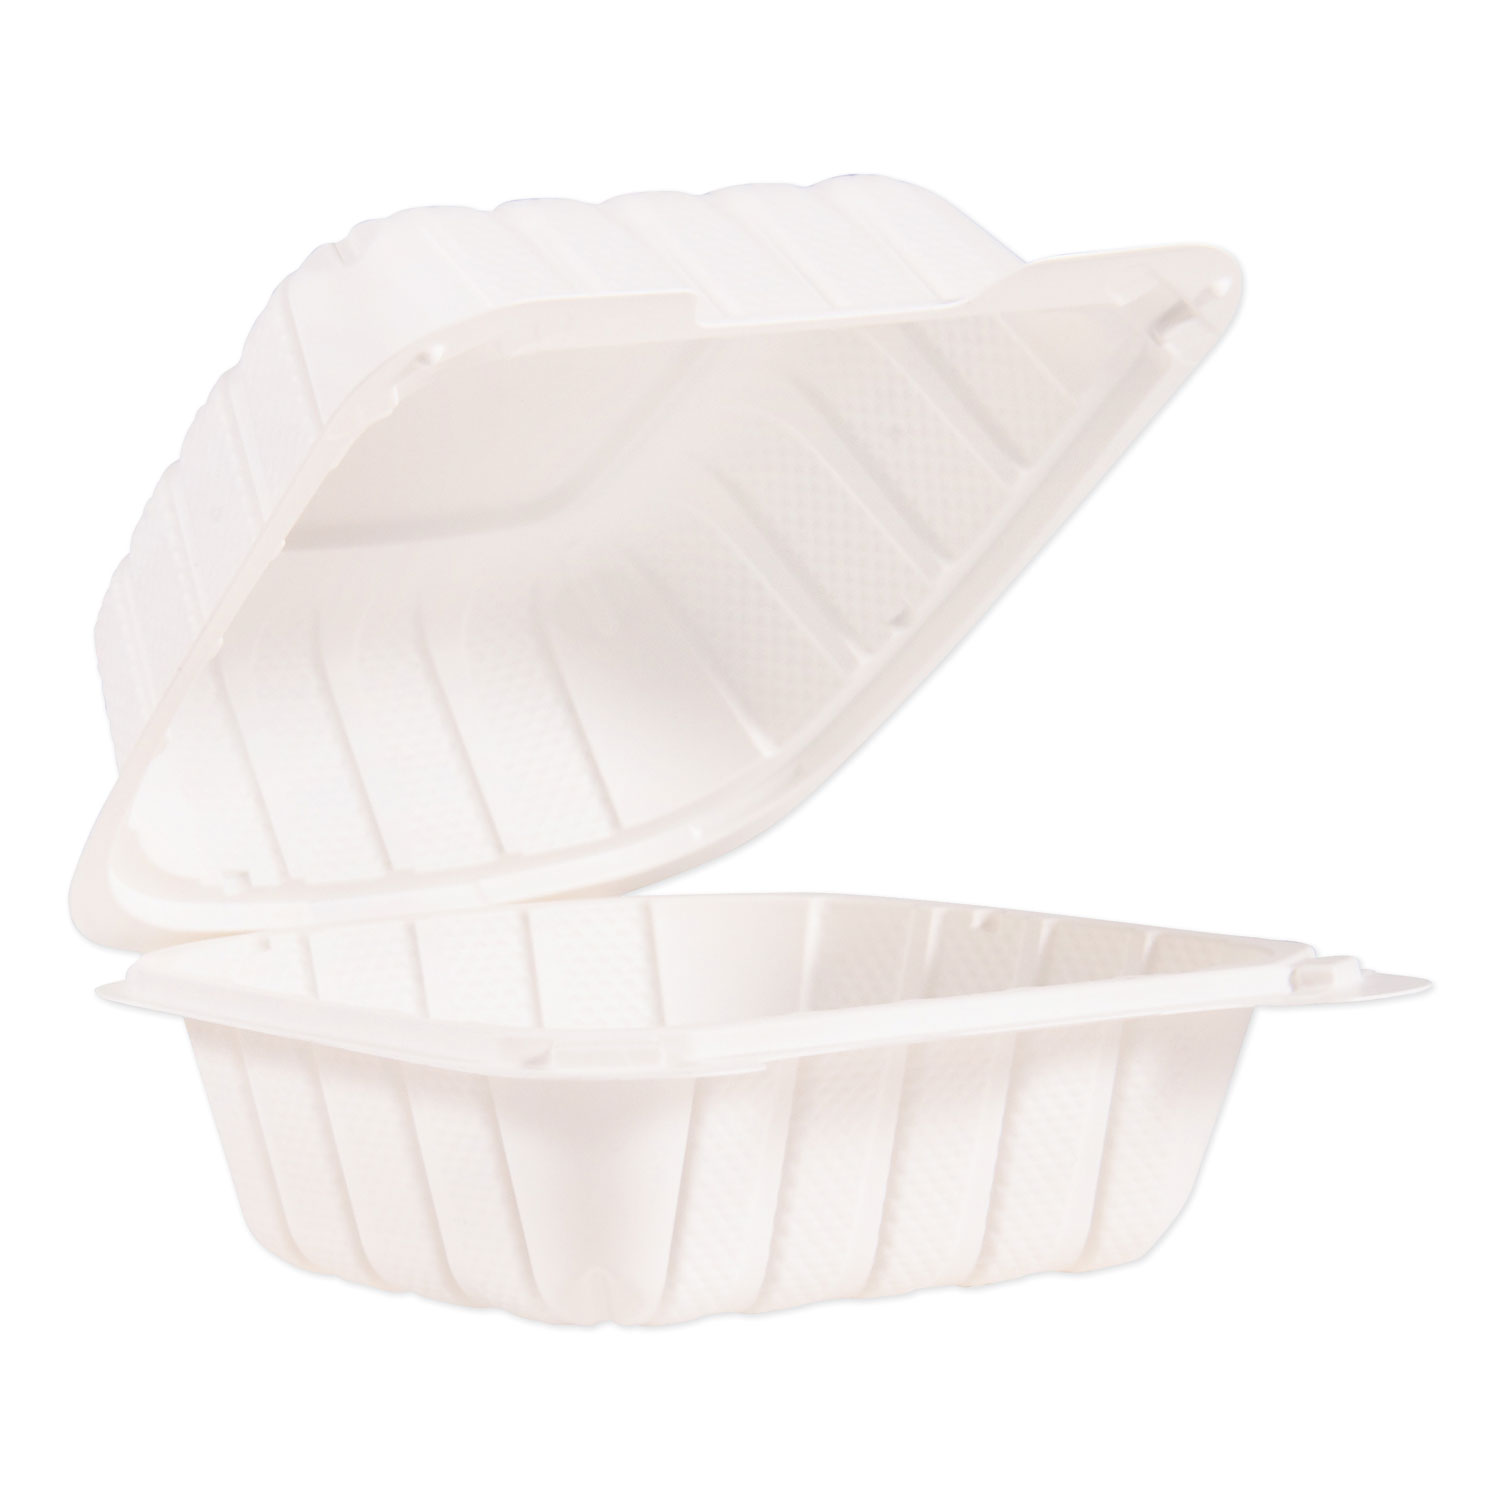  ProPlanet by Dart 60MFPPHT1 Hinged Lid Containers, 6 x 6.3 x 3.3, White, 400/Carton (DCC60MFPPHT1) 